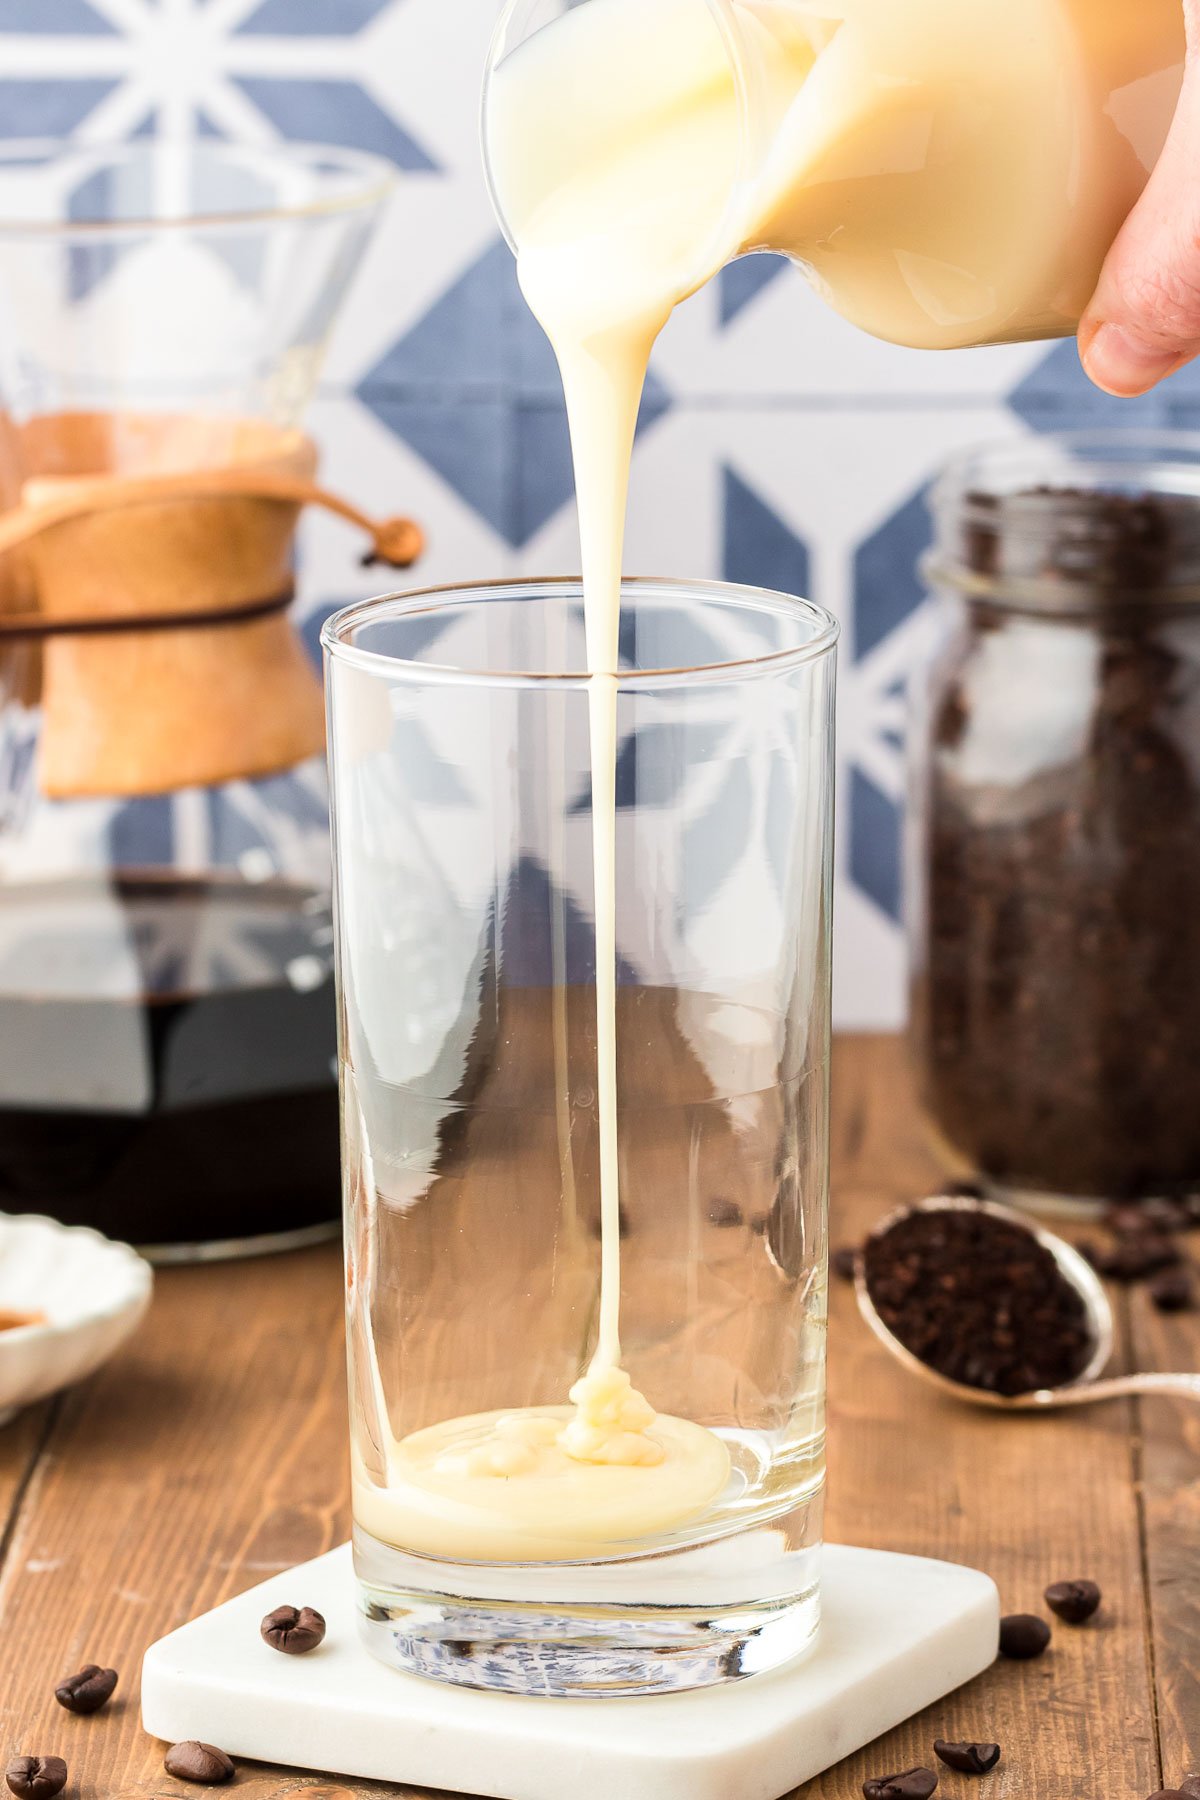 Sweetened condensed milk being poured into a tall glass.